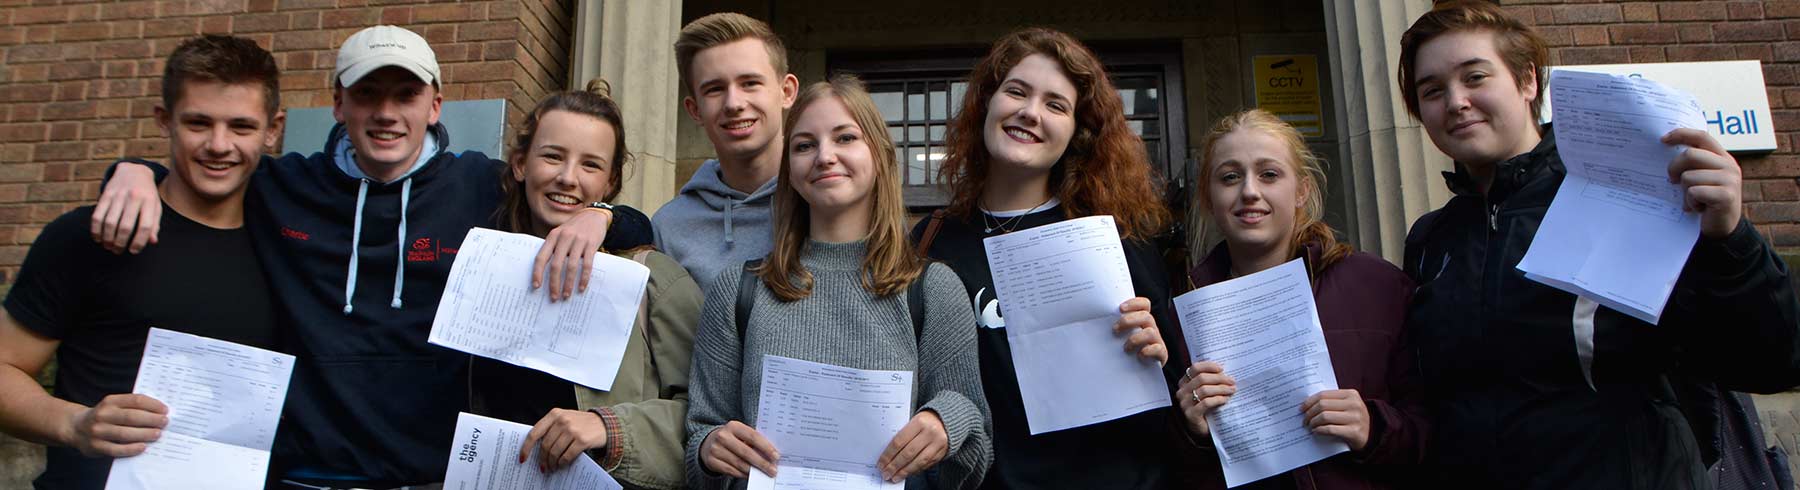 A big group of students holding their exam results